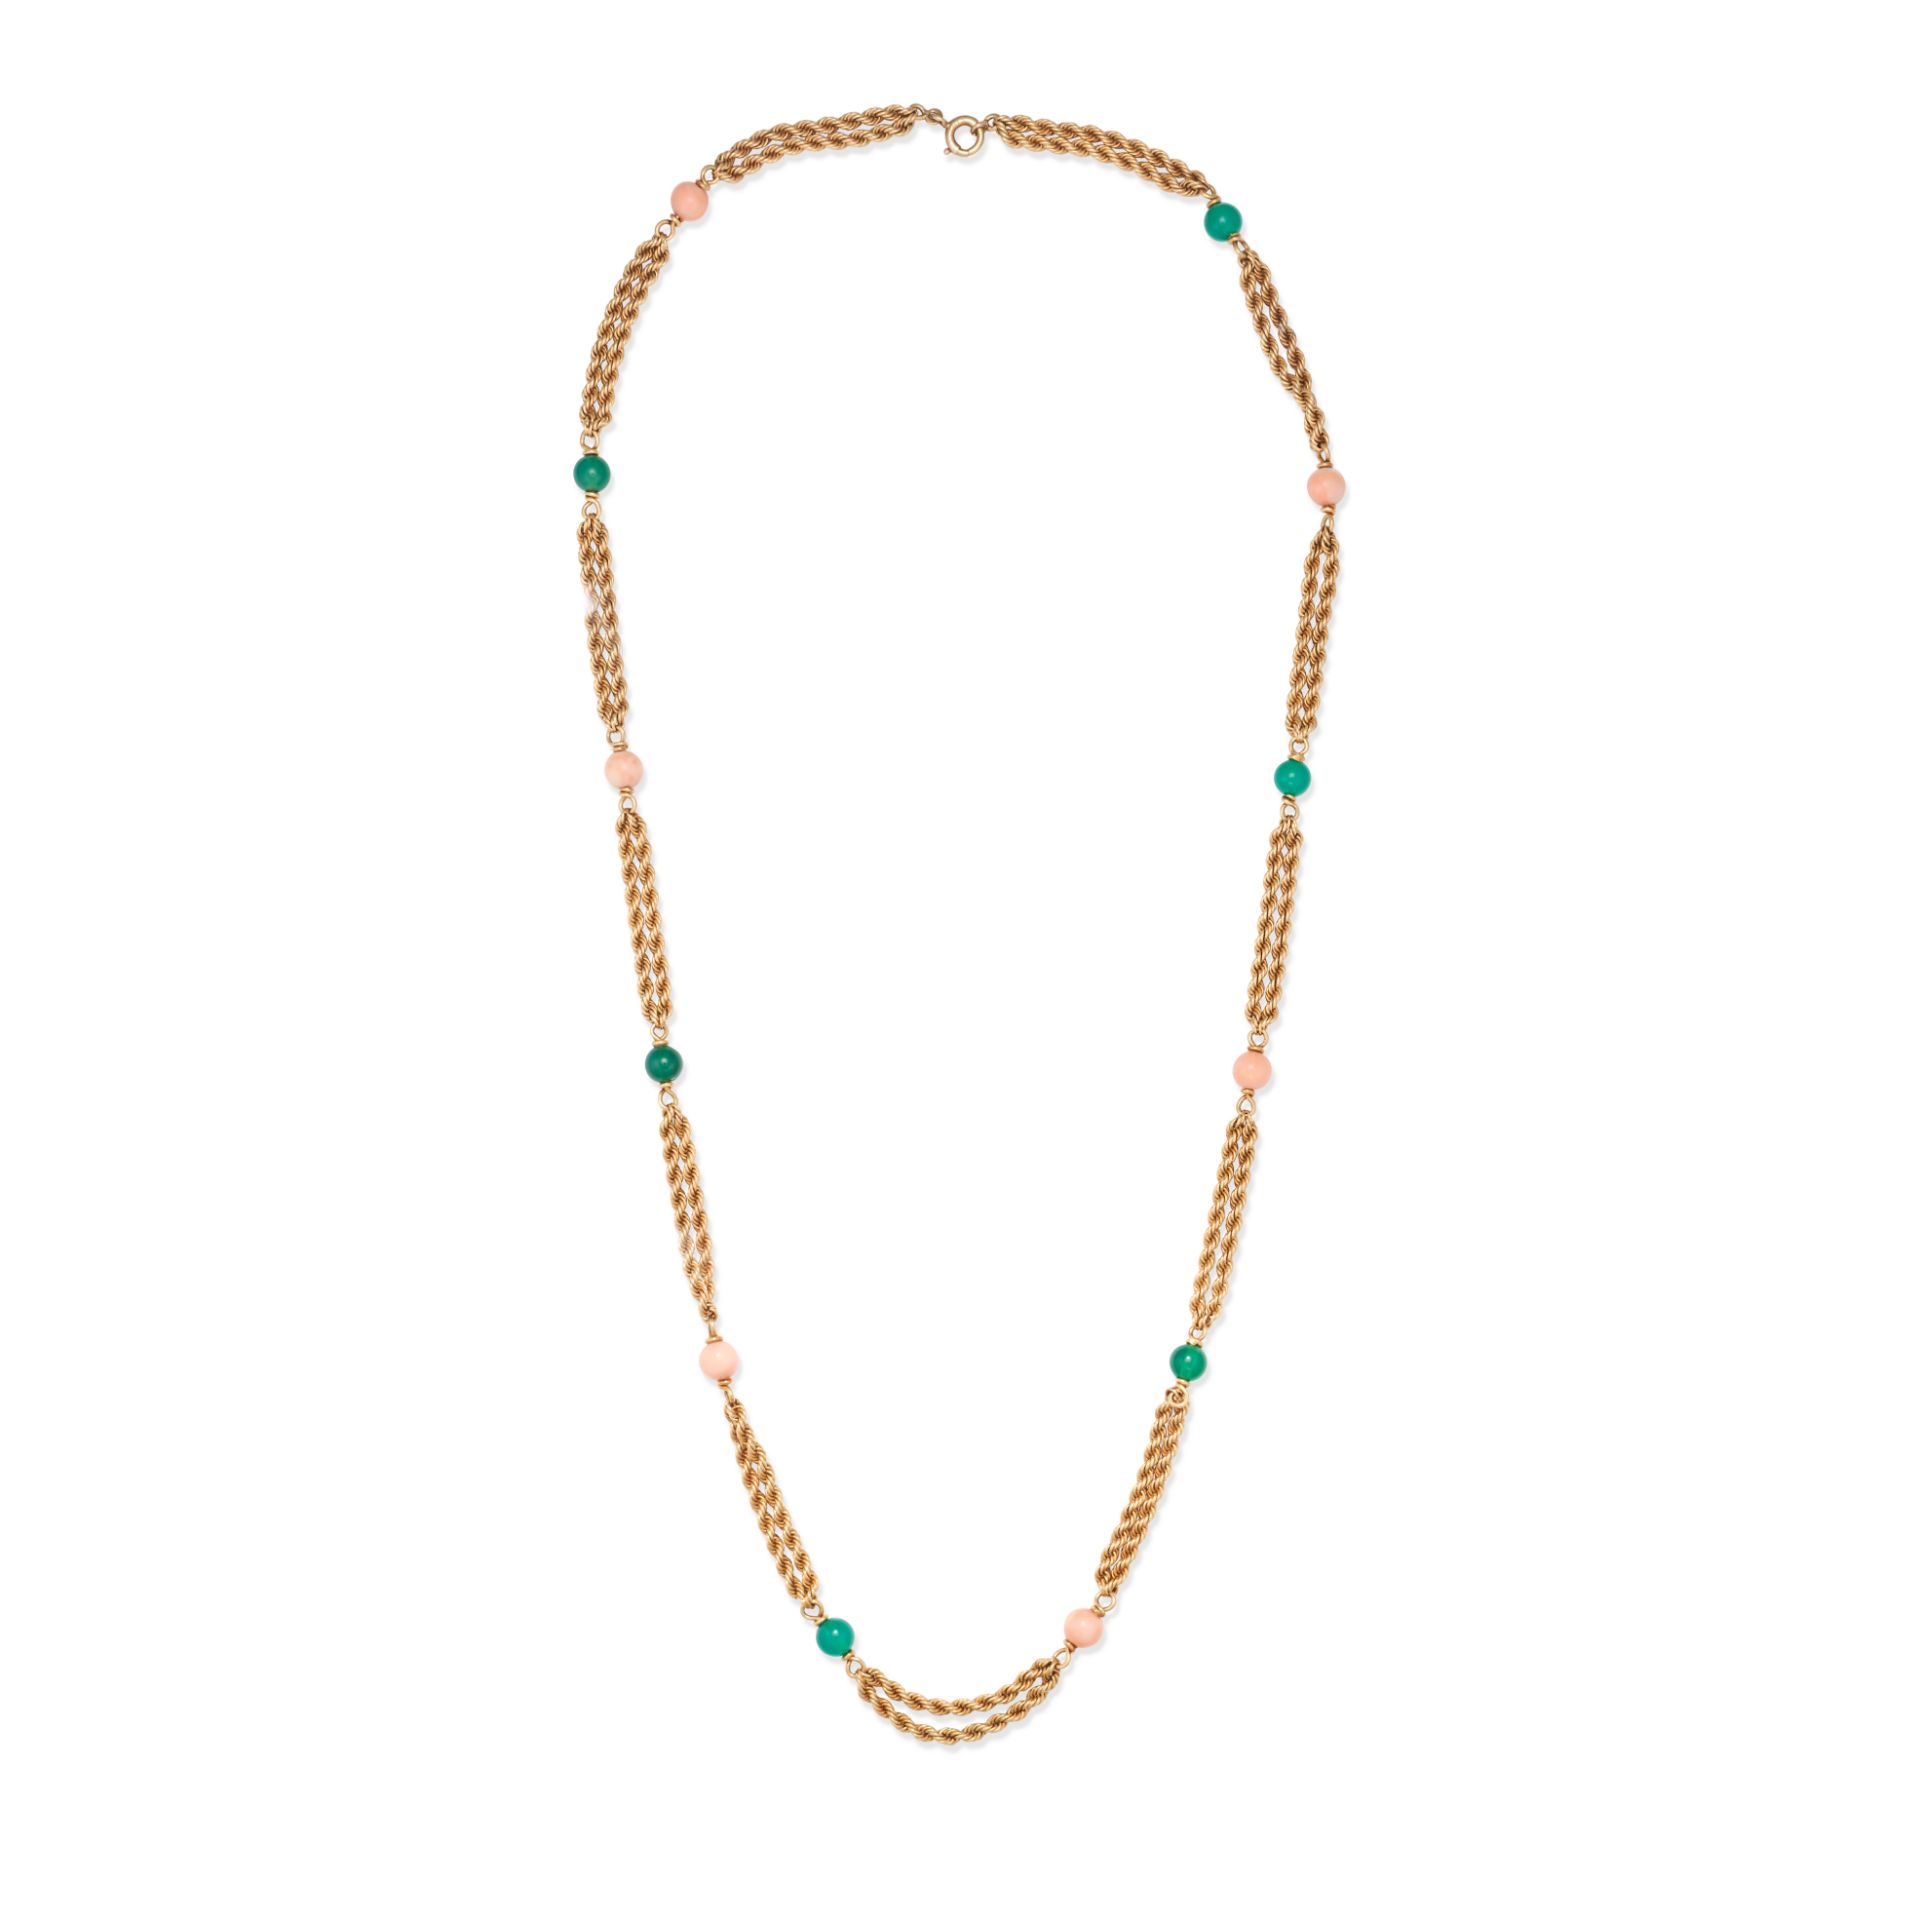 VAN CLEEF & ARPELS, A COLLECTION OF FRENCH CORAL AND CHRYSOPRASE VAN CLEEF & ARPELS JEWELLERY in ... - Bild 8 aus 8